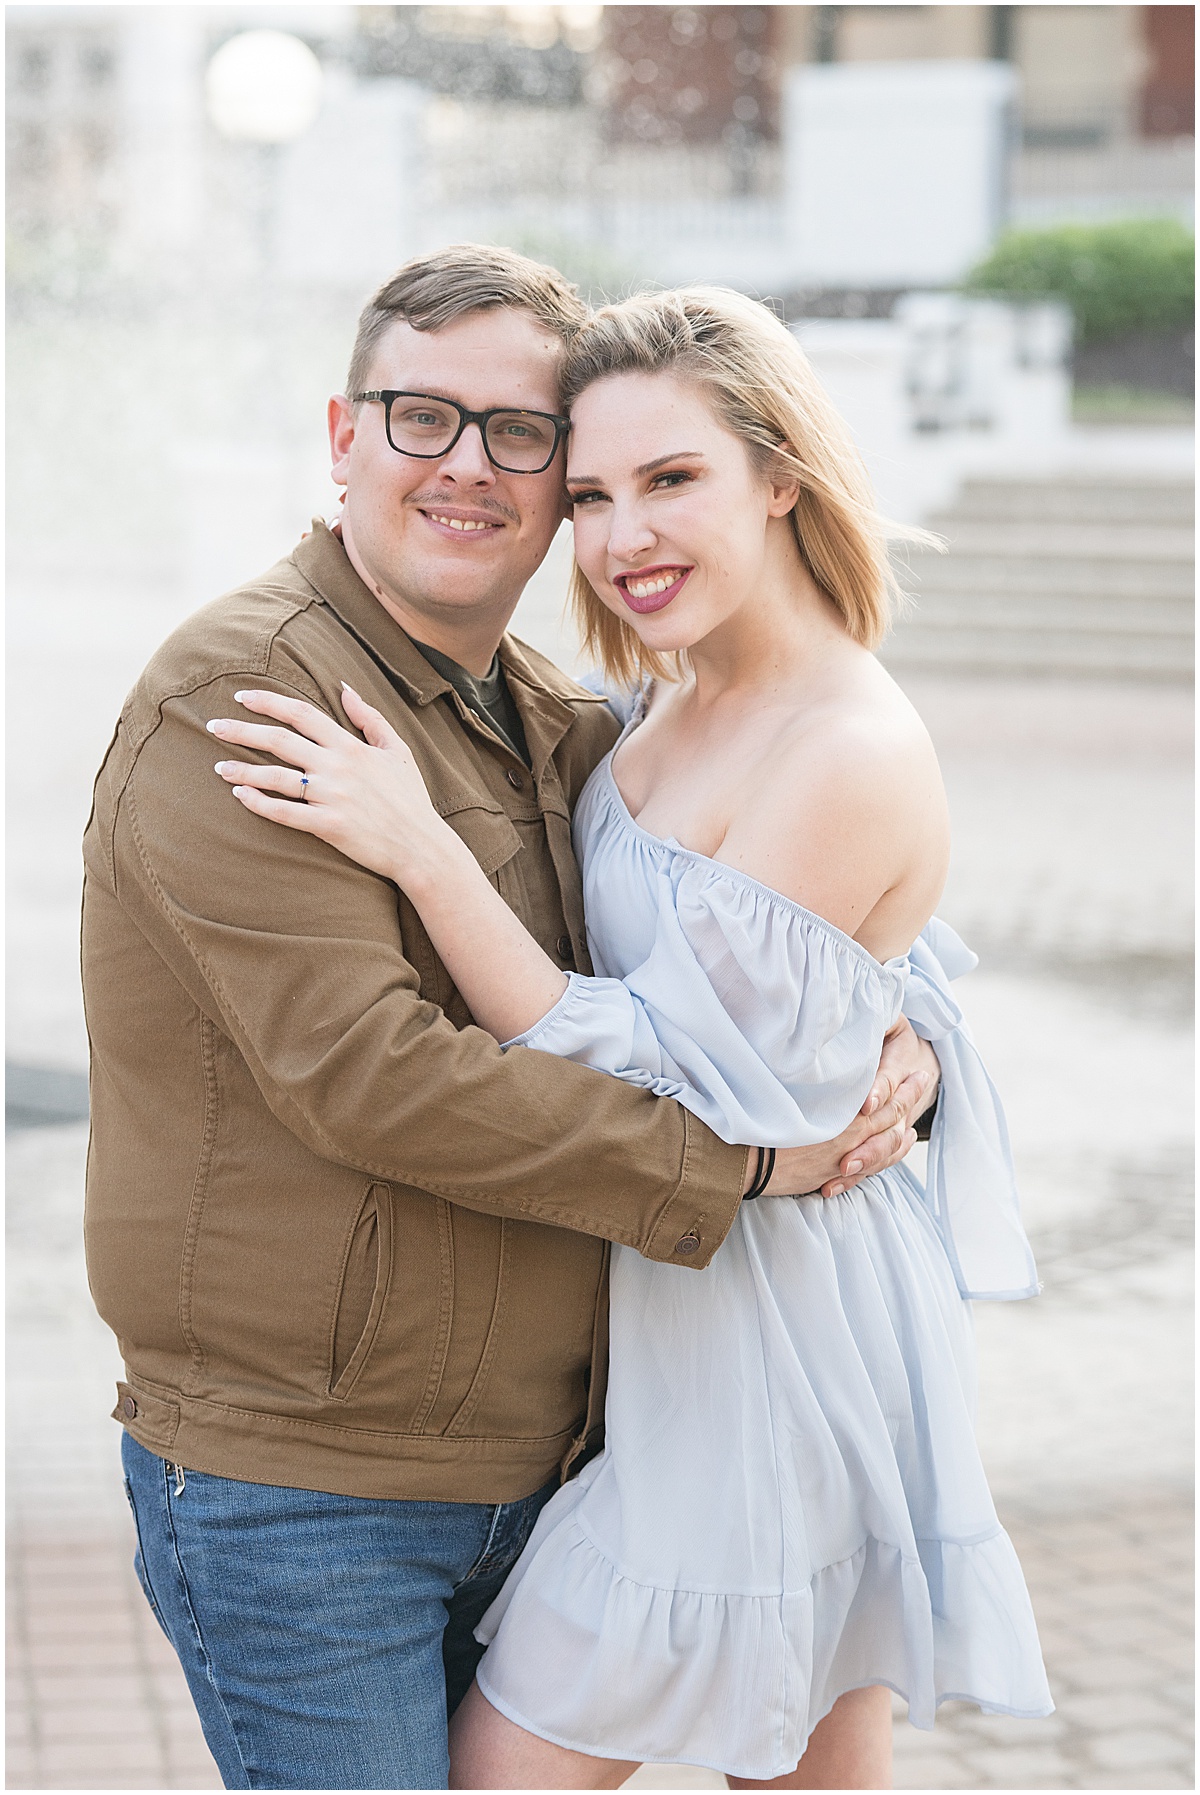 during engagement photos in Downtown Lafayette, Indiana by the Tippecanoe Arts Federation